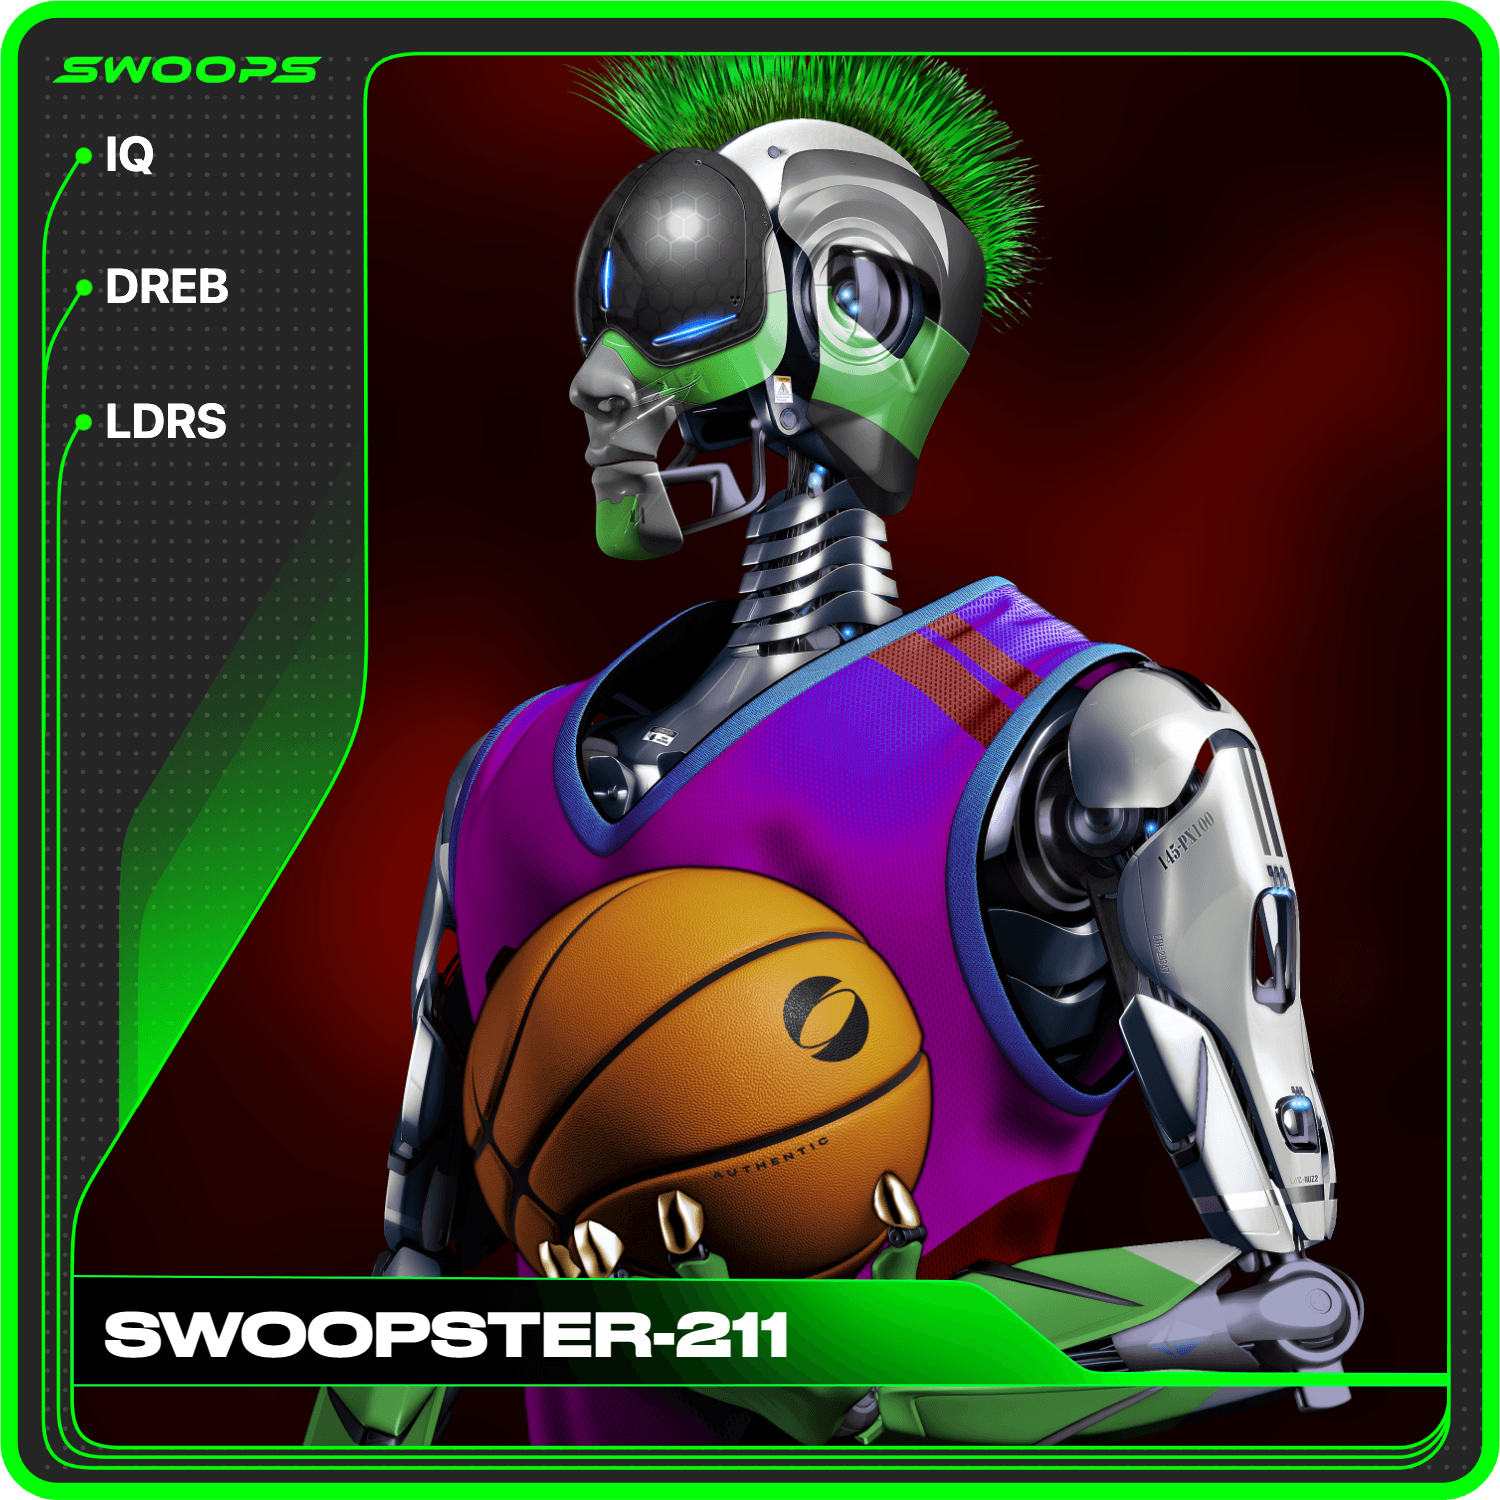 SWOOPSTER-211